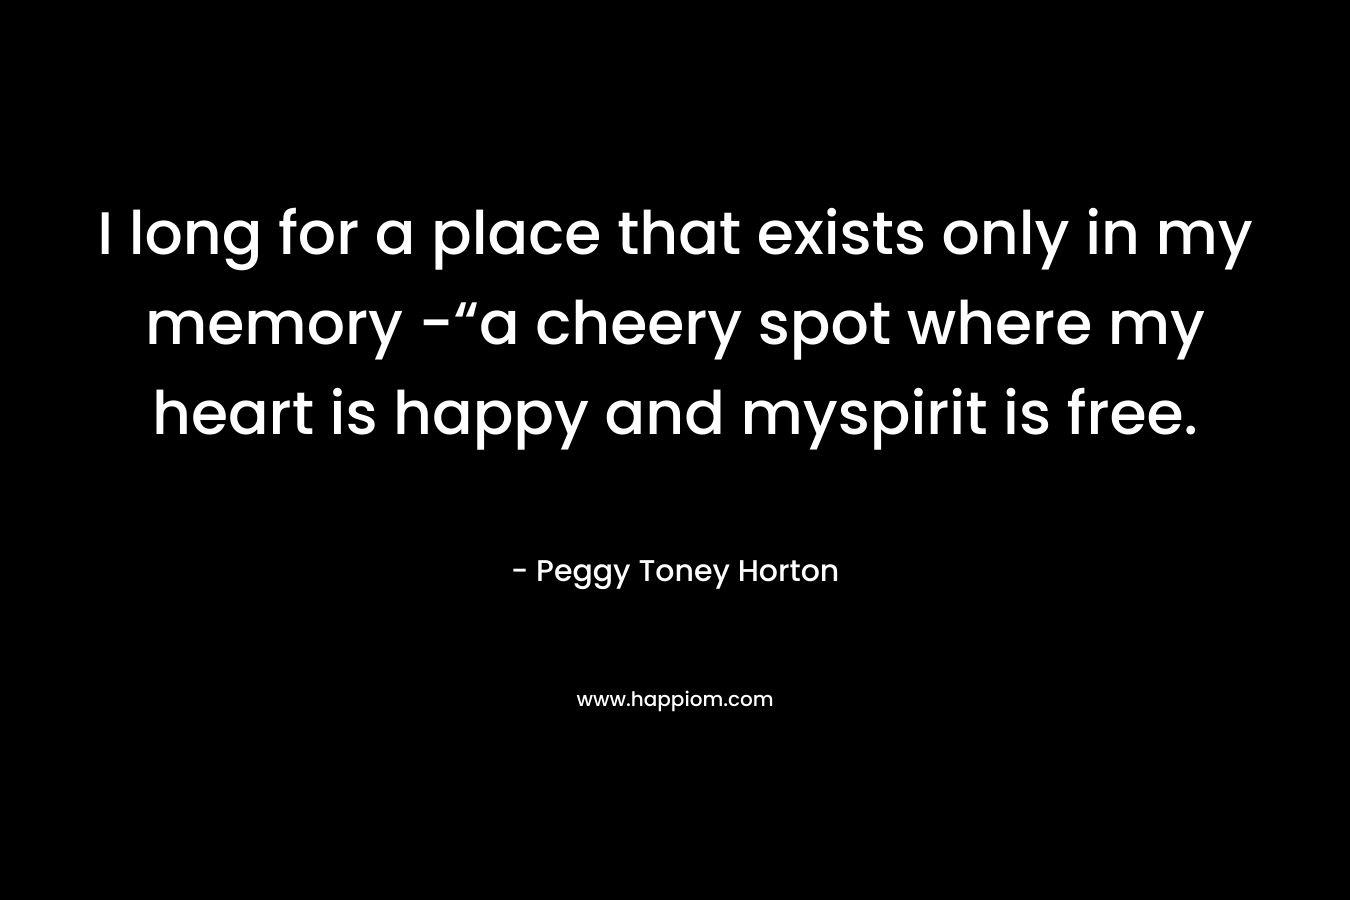 I long for a place that exists only in my memory -“a cheery spot where my heart is happy and myspirit is free. – Peggy Toney Horton